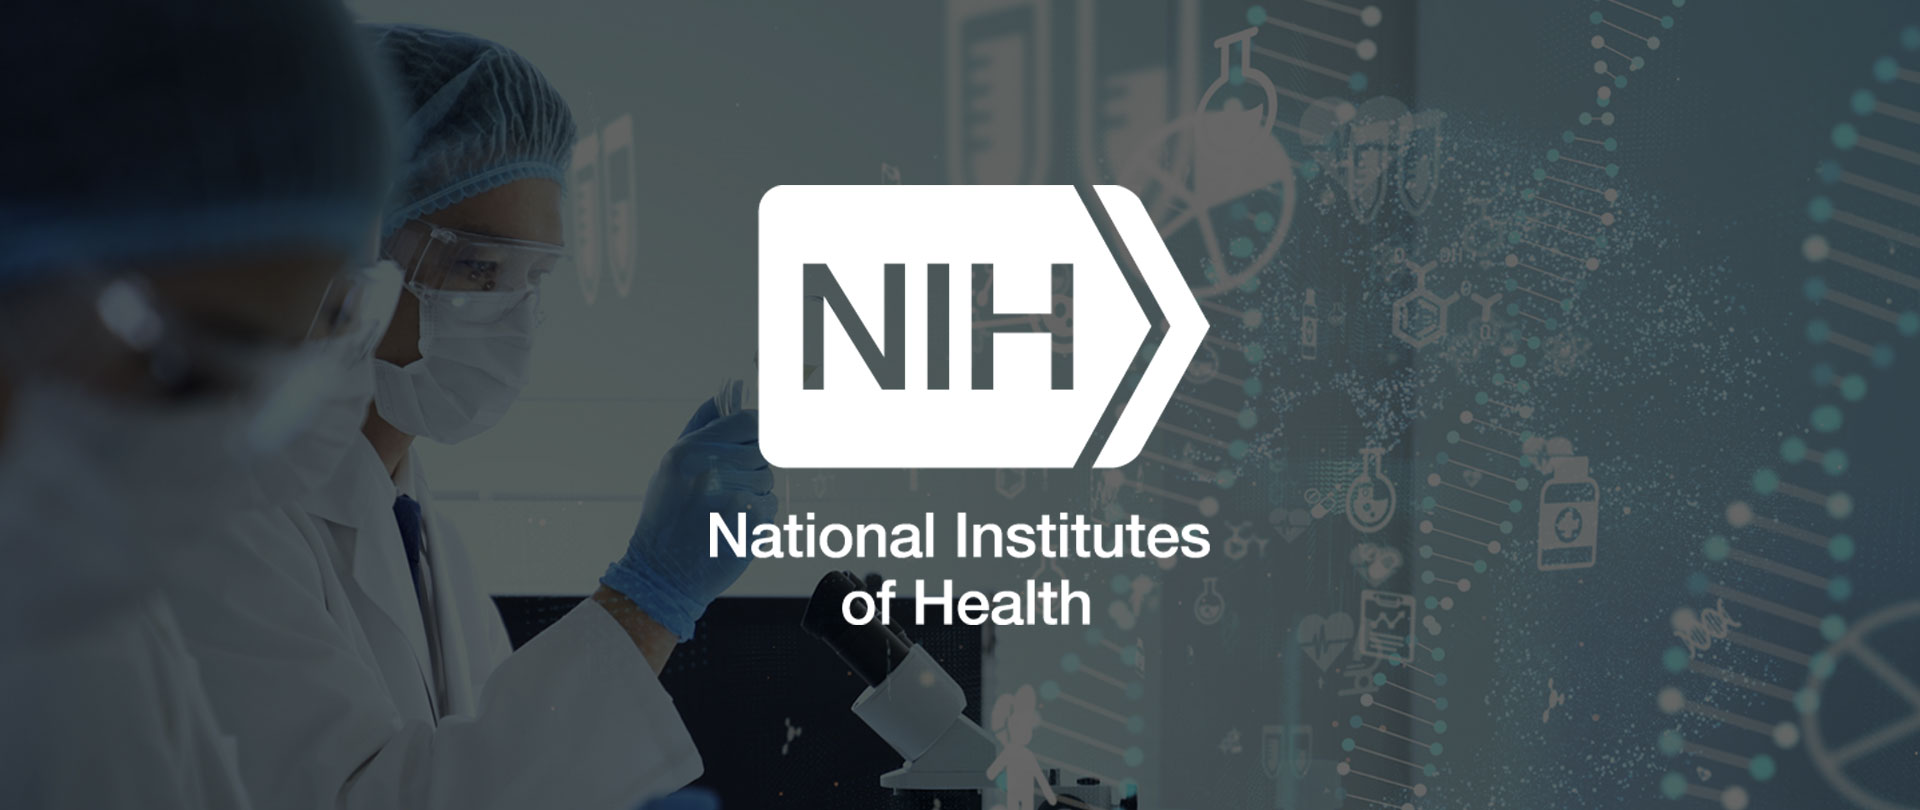 National Institutes of Health – Center for Scientific Research  